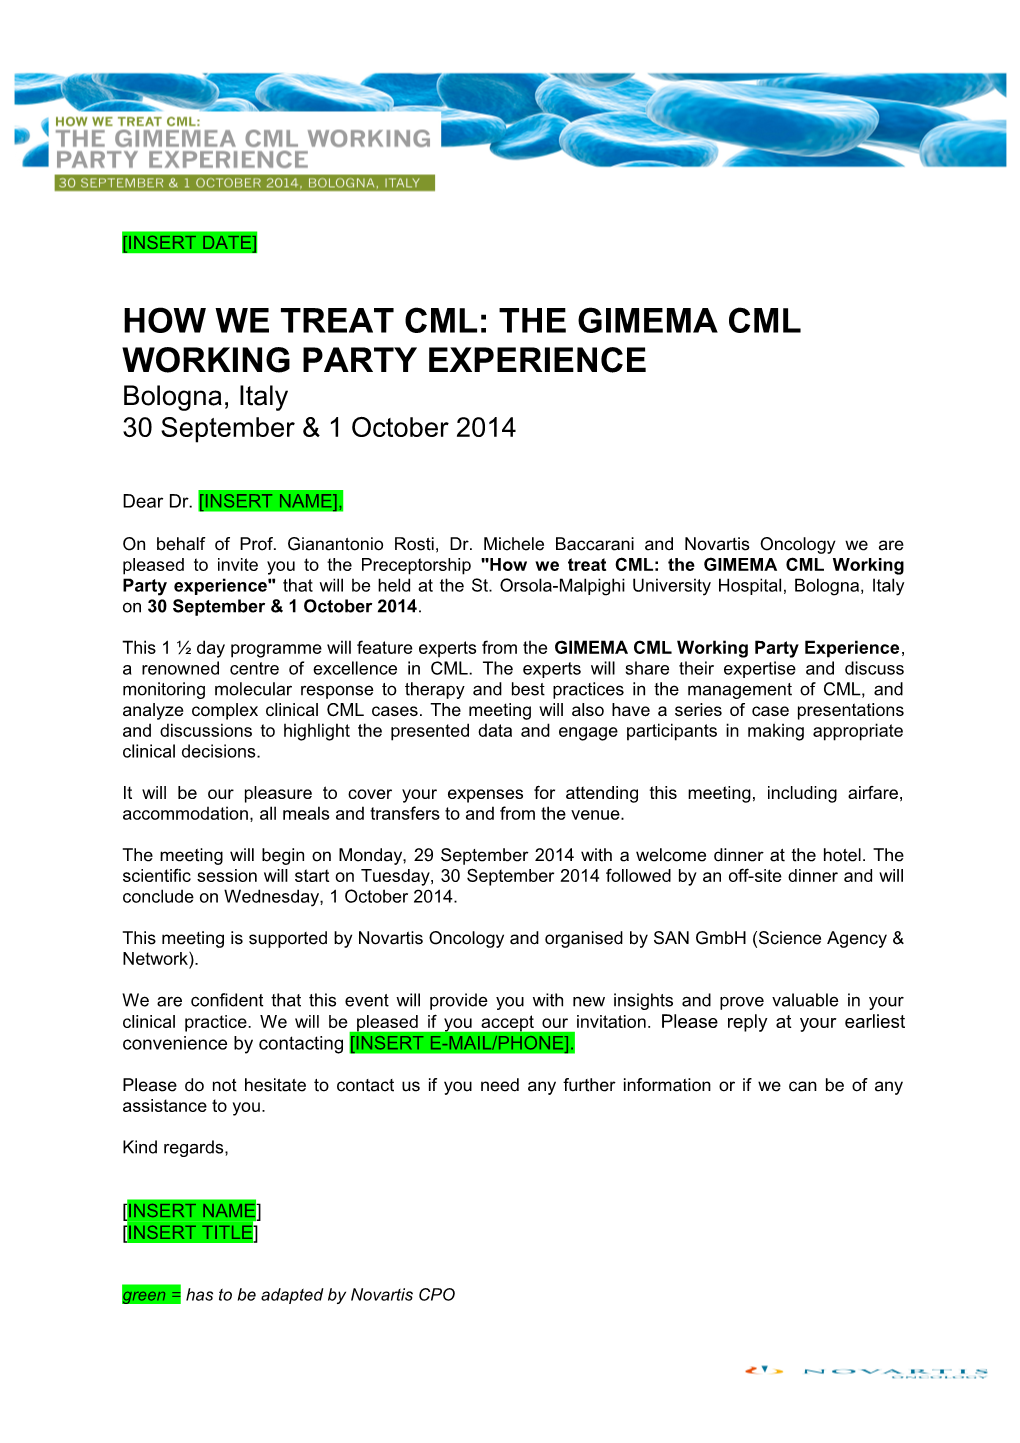 How We Treat Cml: the Gimema Cml Working Party Experience